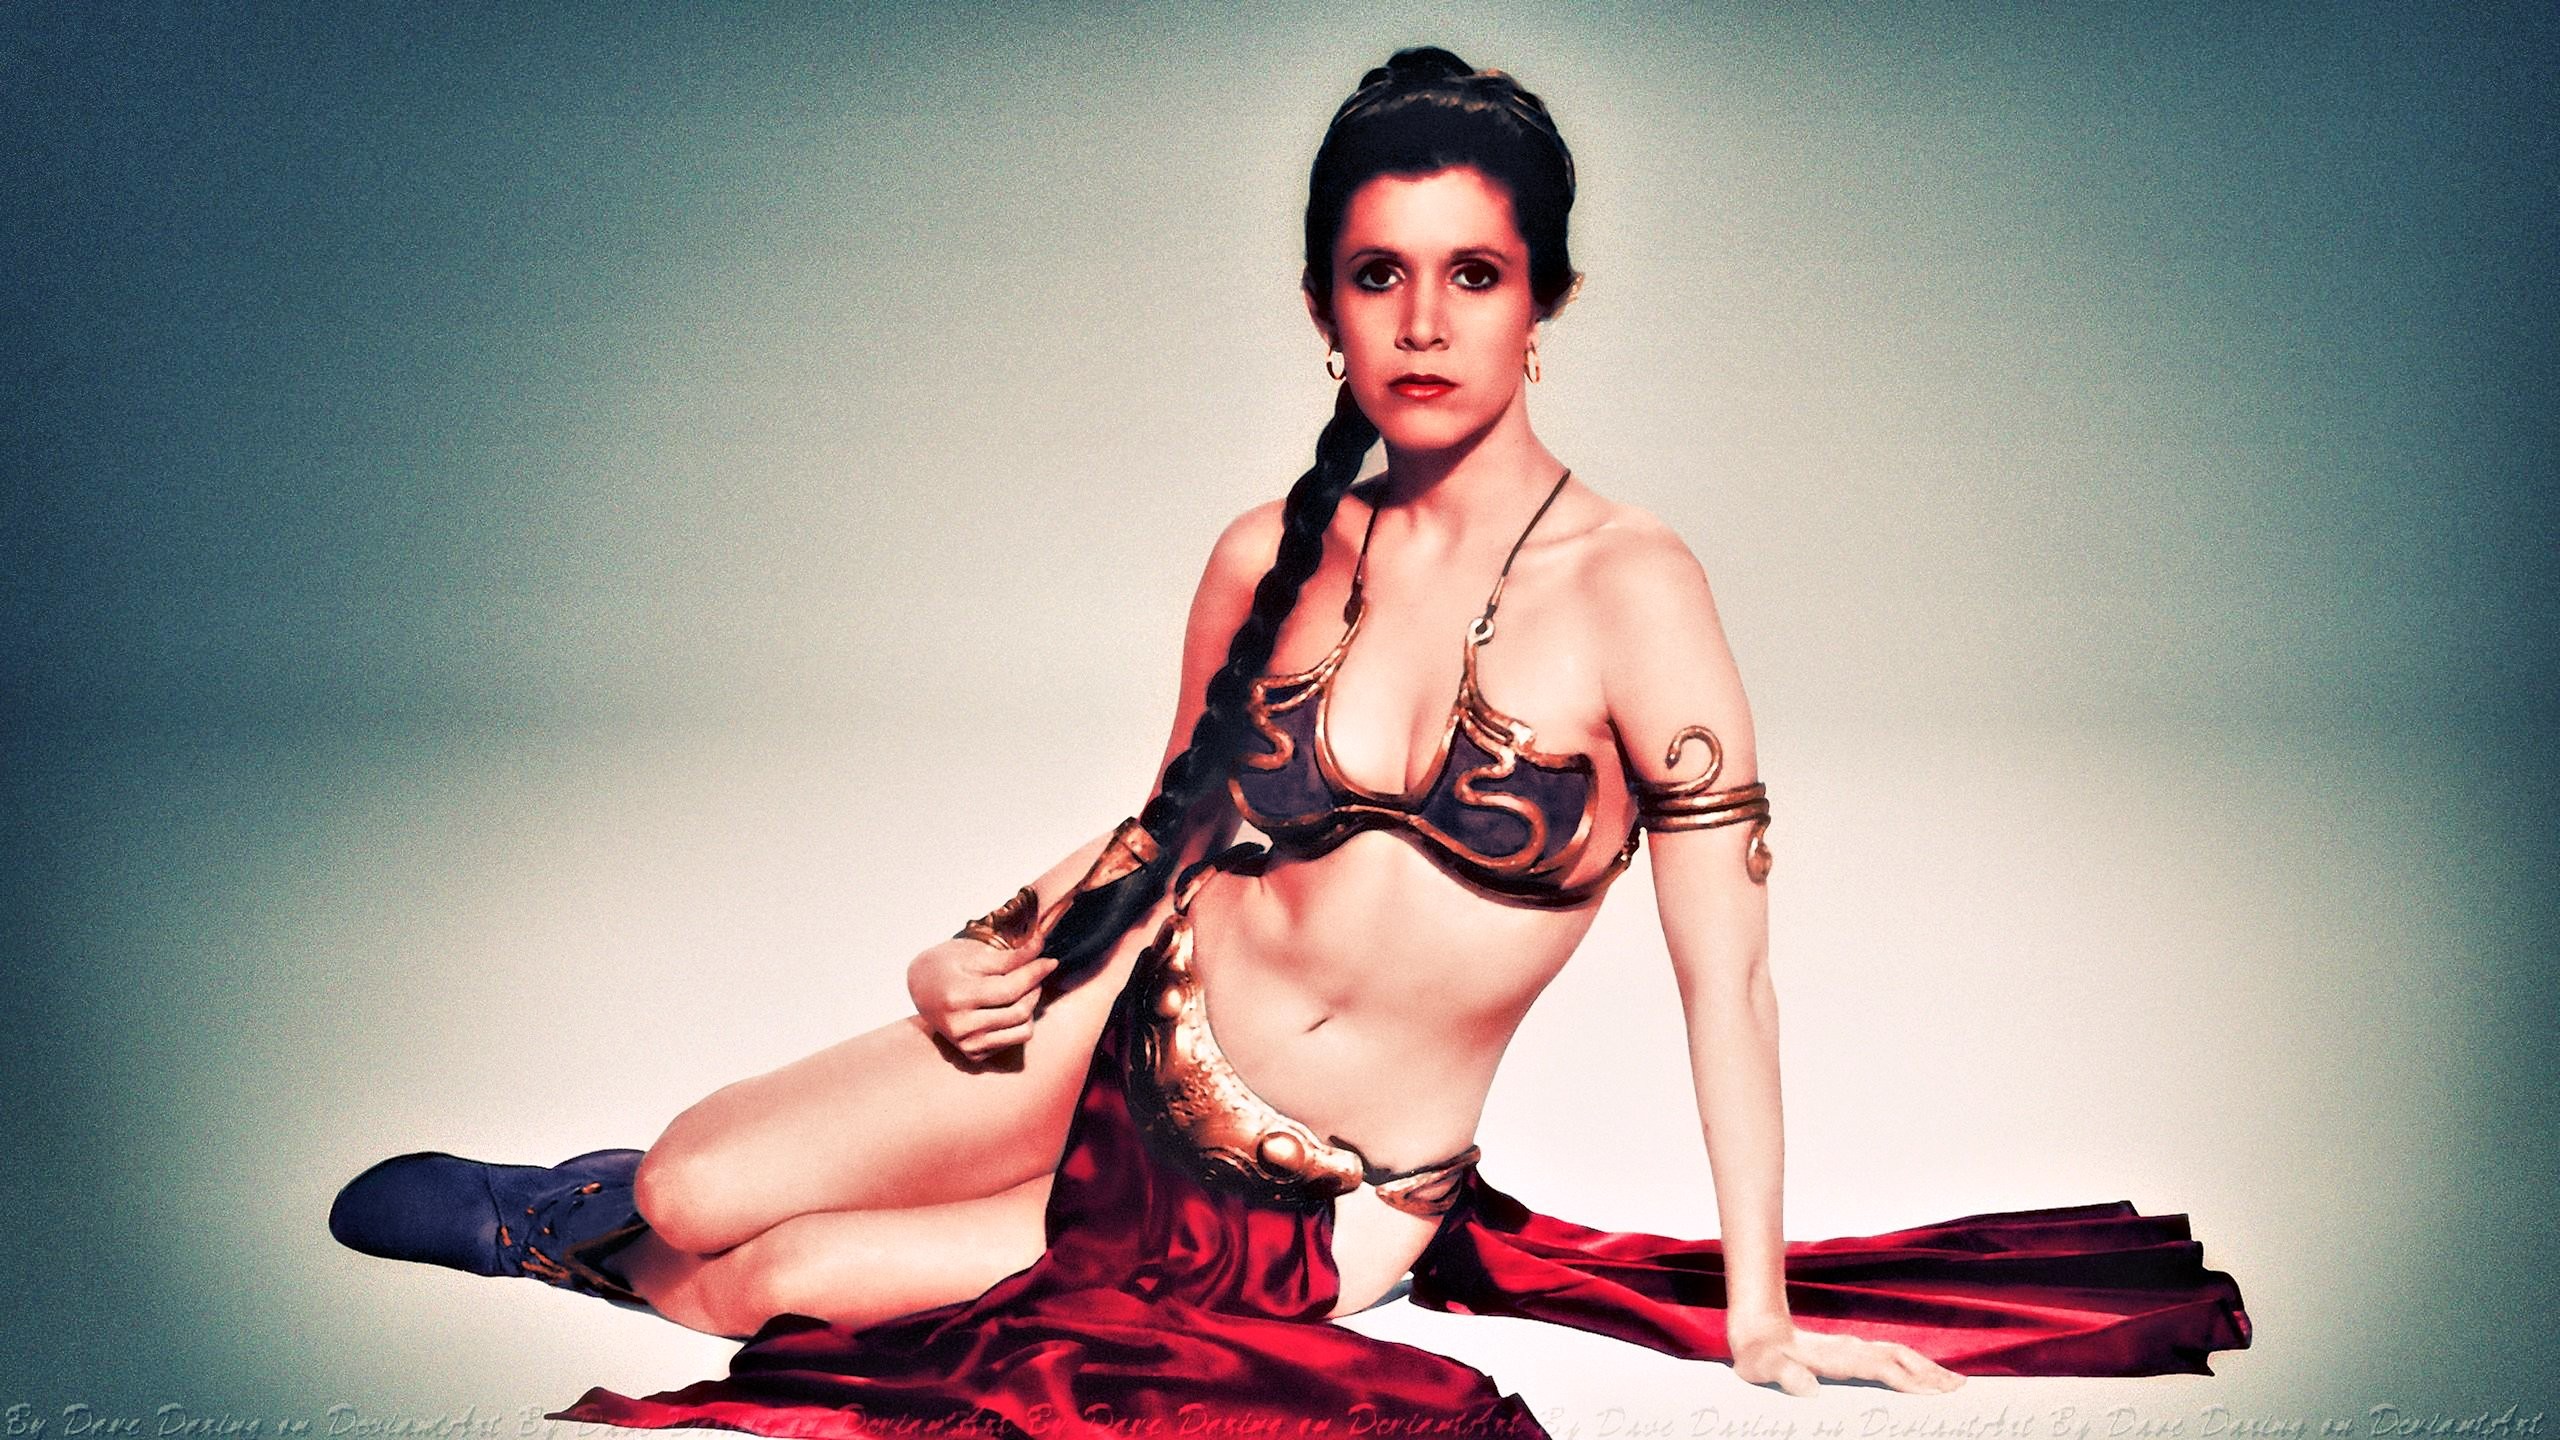 2560x1440 ... Carrie Fisher Slave Girl Princess VII Colourized by Dave-Daring